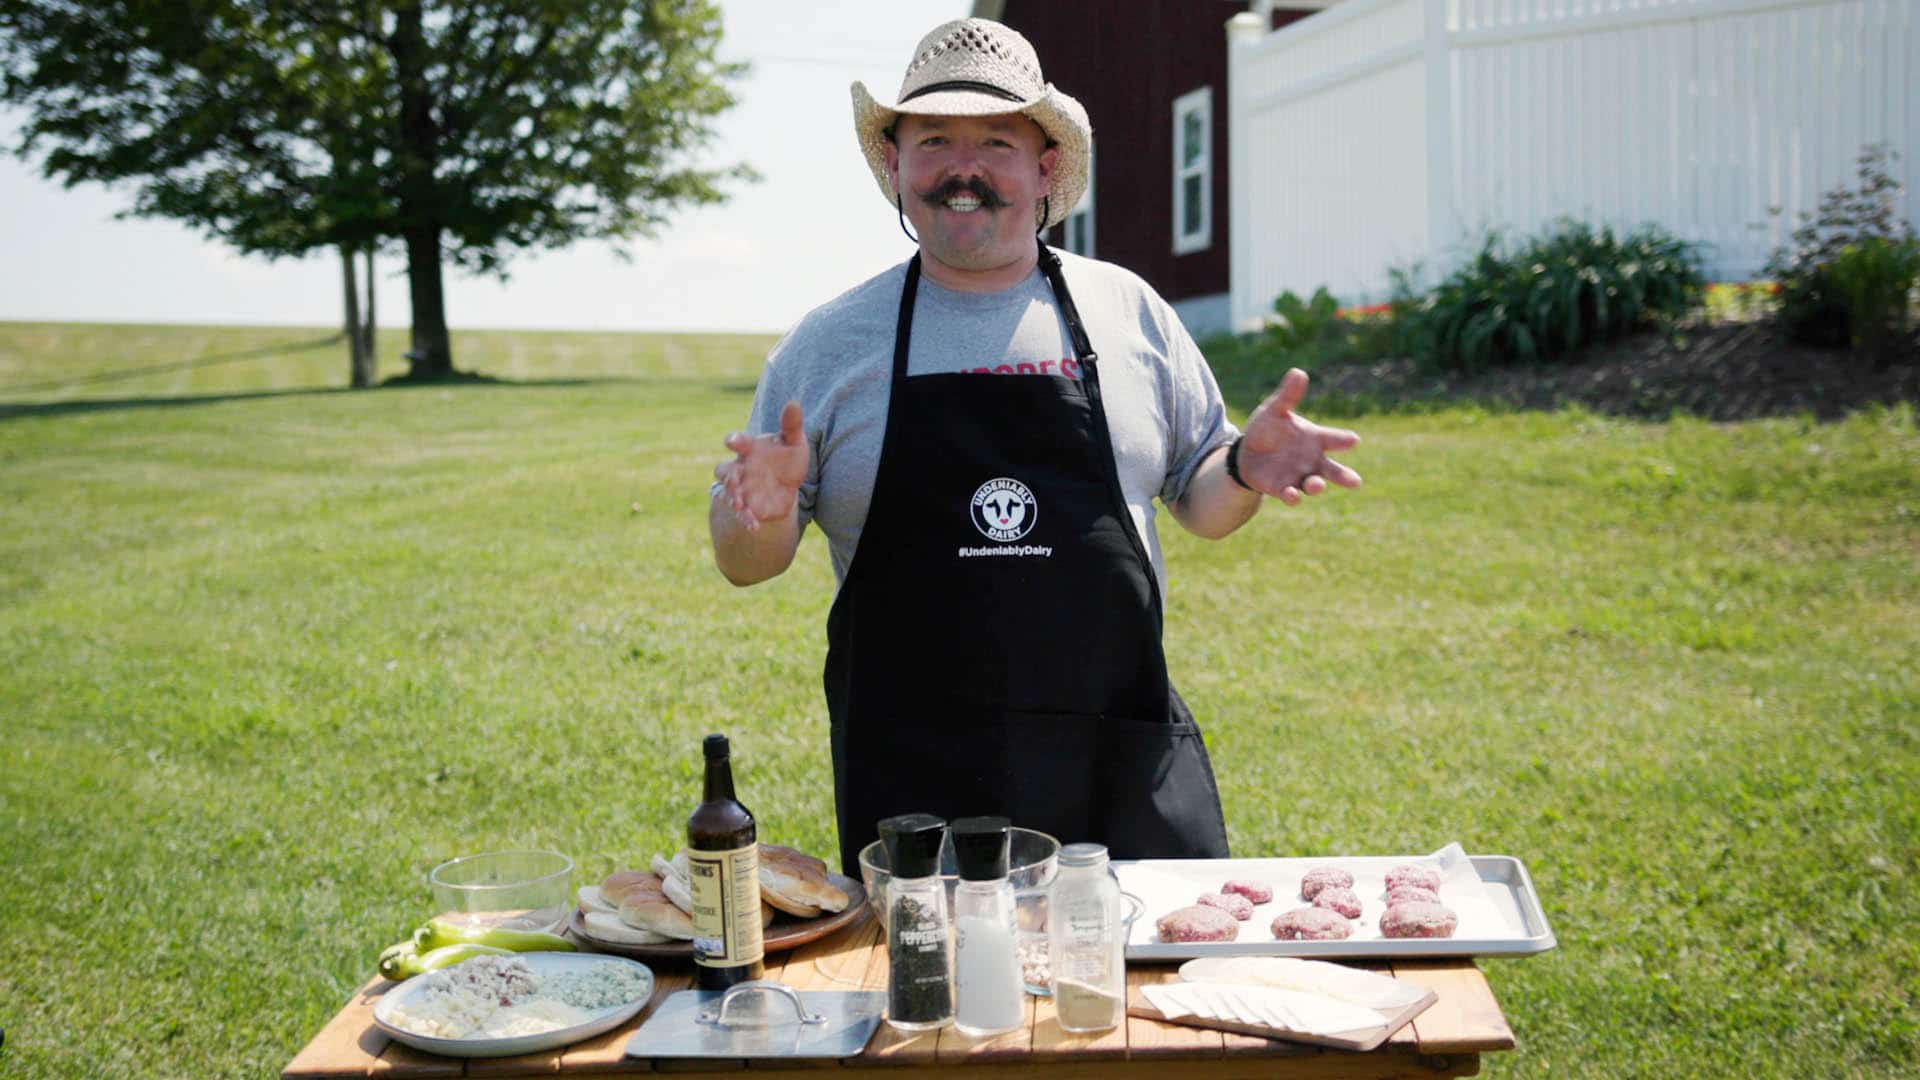 New York Dairy Dad Grills Dinner in Honor of Father’s Day